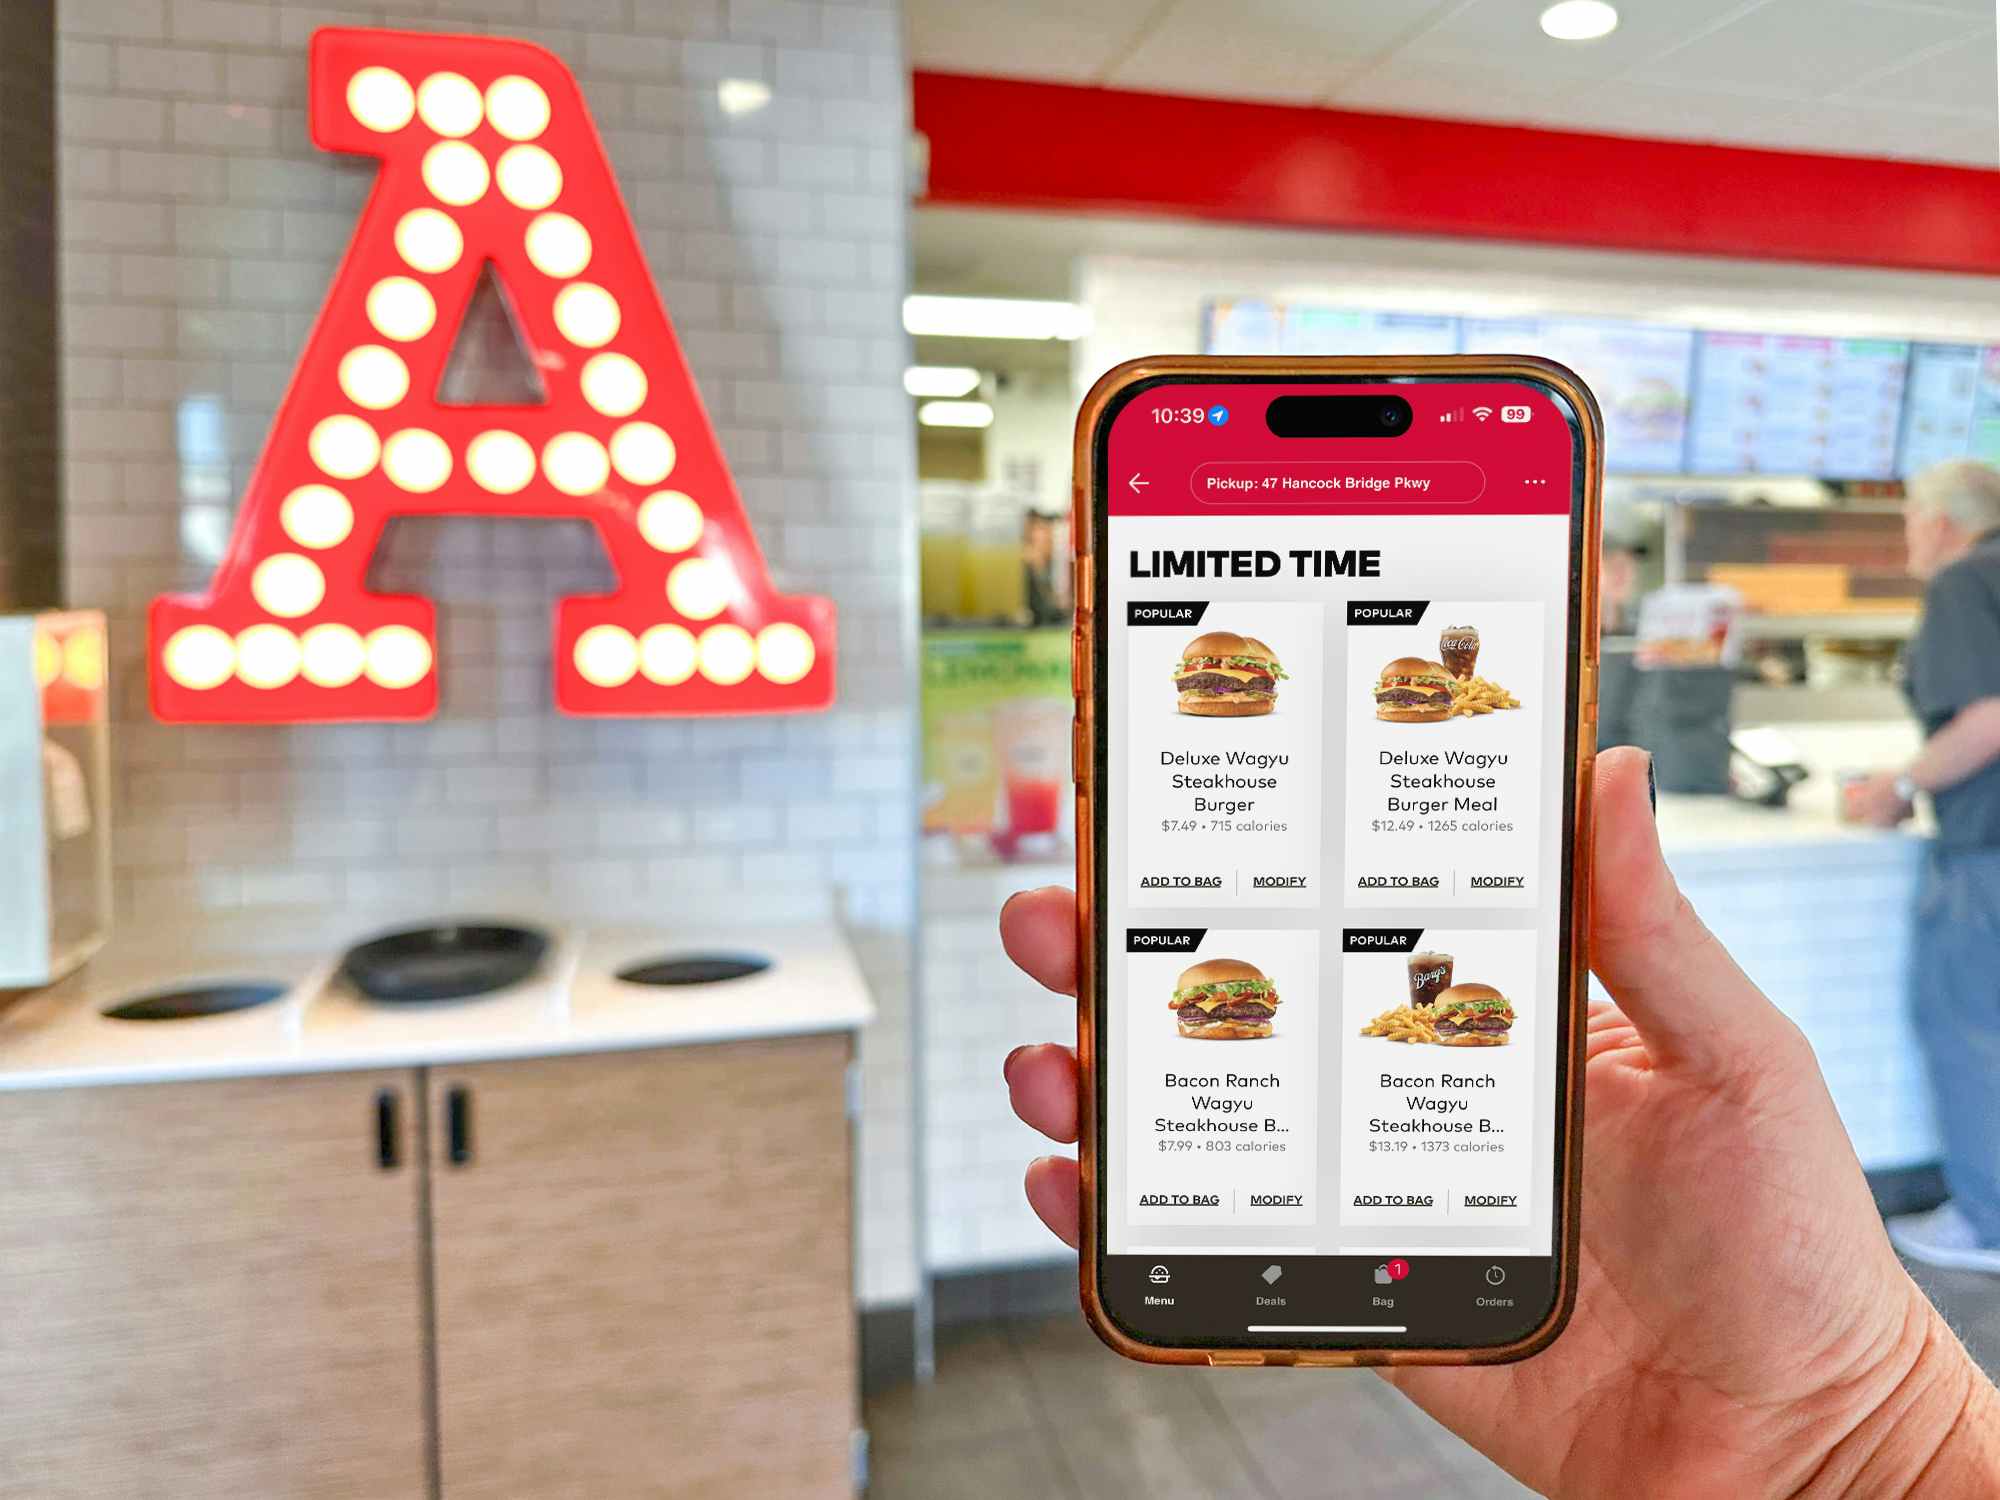 Someone holding a phone displaying the Arby's app next to an Arby's sign